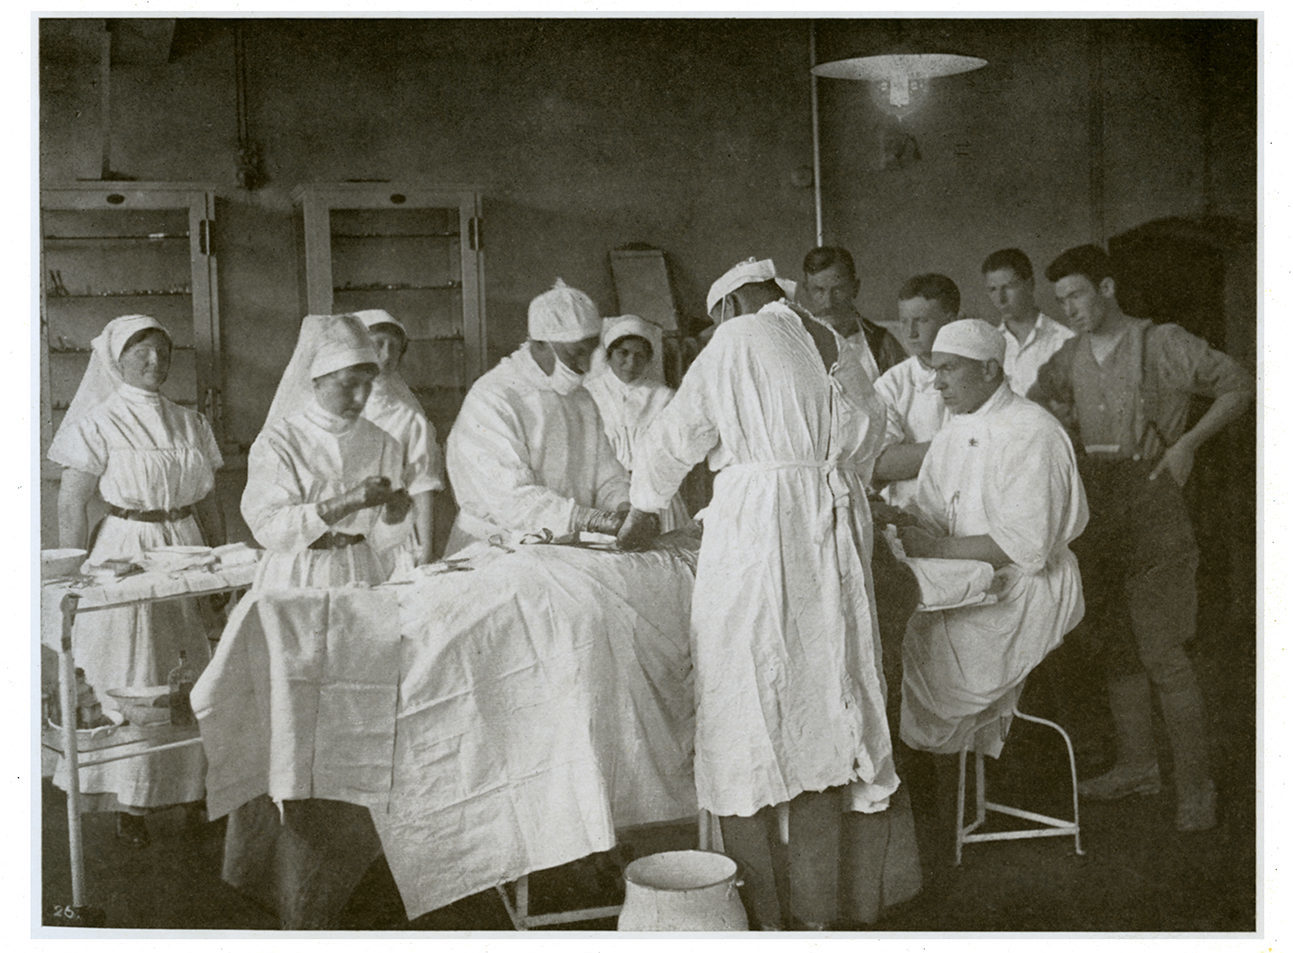 Surgery being performed in a converted cowshed in Boulogne, c. 1915-17. From A.H. Pirie’s Views Illustrating Life and Scenes in the Hospital, 1923.